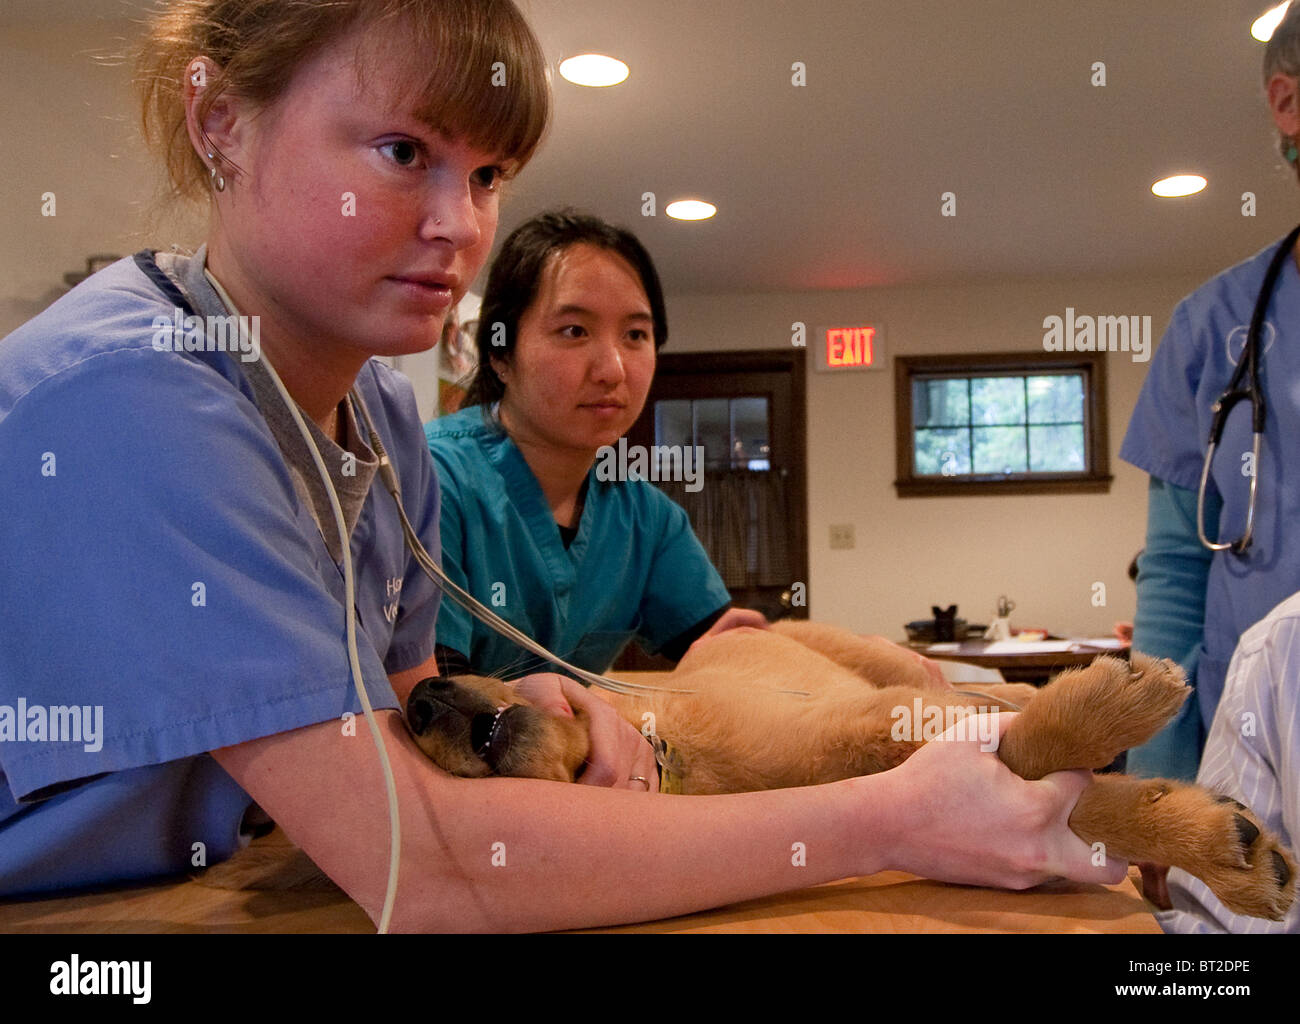 Veterinary cardiologist performing echocardiogram on a puppy at a veterinary clinic with the help of veterinary techs Stock Photo